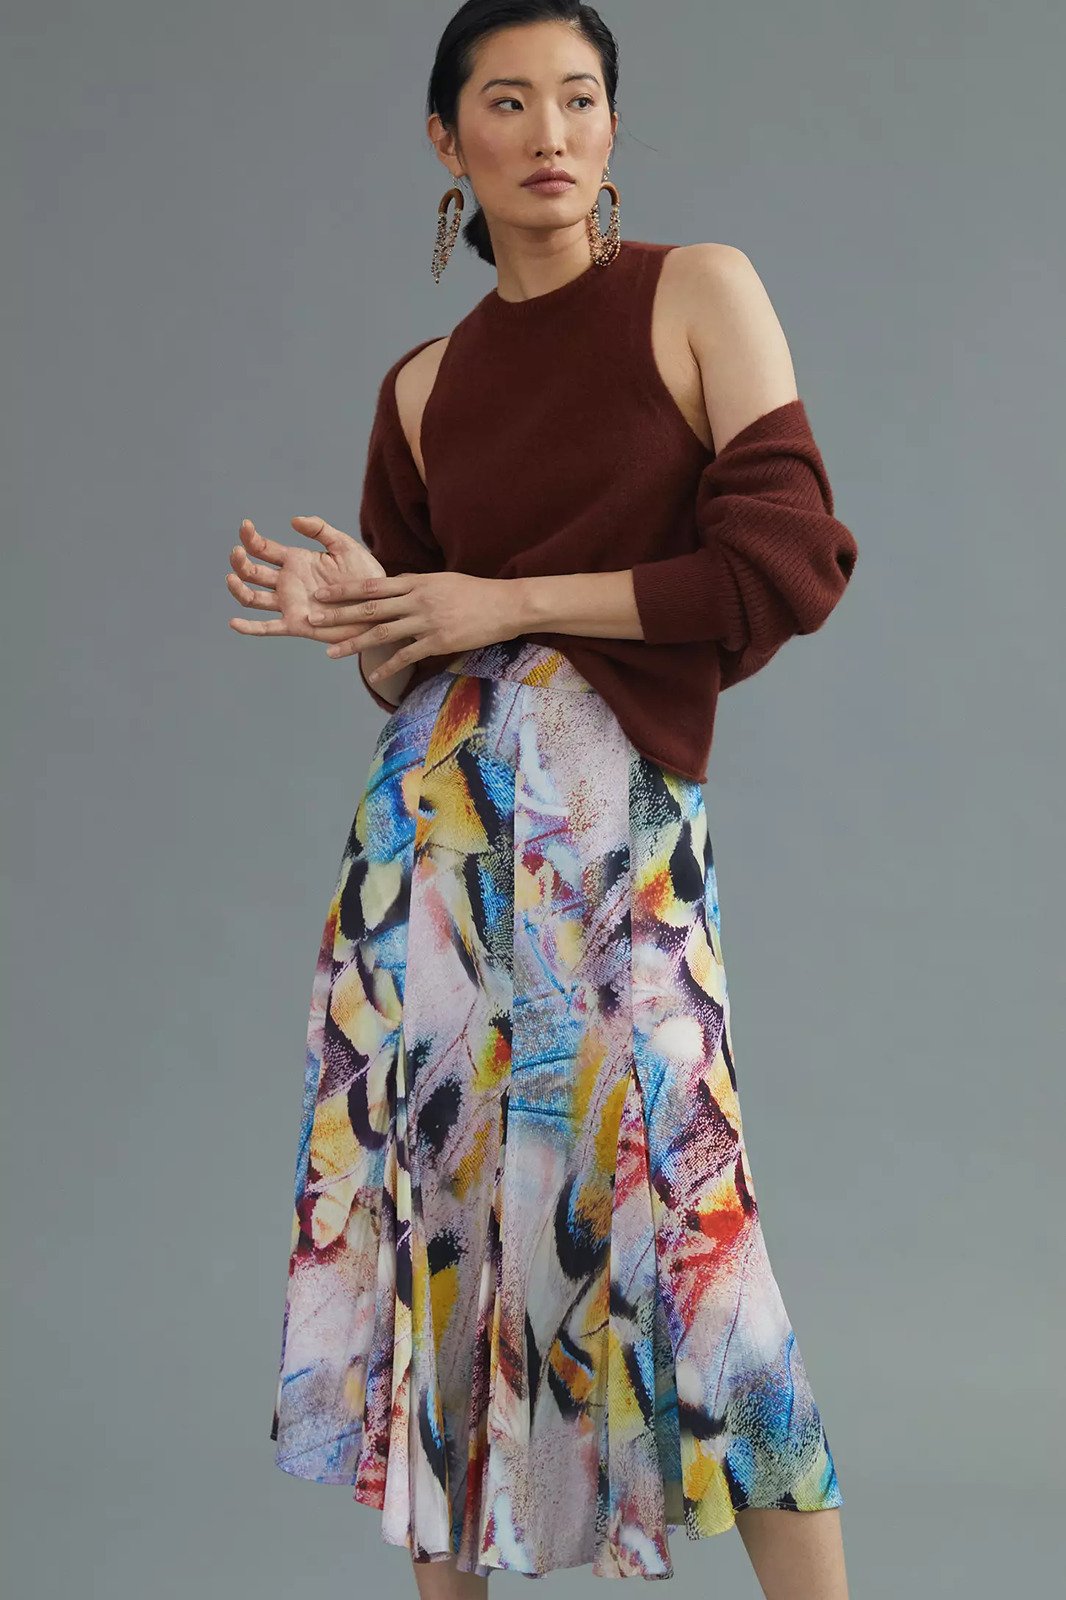 Classic NWT Anthropologie 2 A-Line Midi Skirt Watercolor Art Vibrant Abstract 160$ OYvi3iExF Wholesale